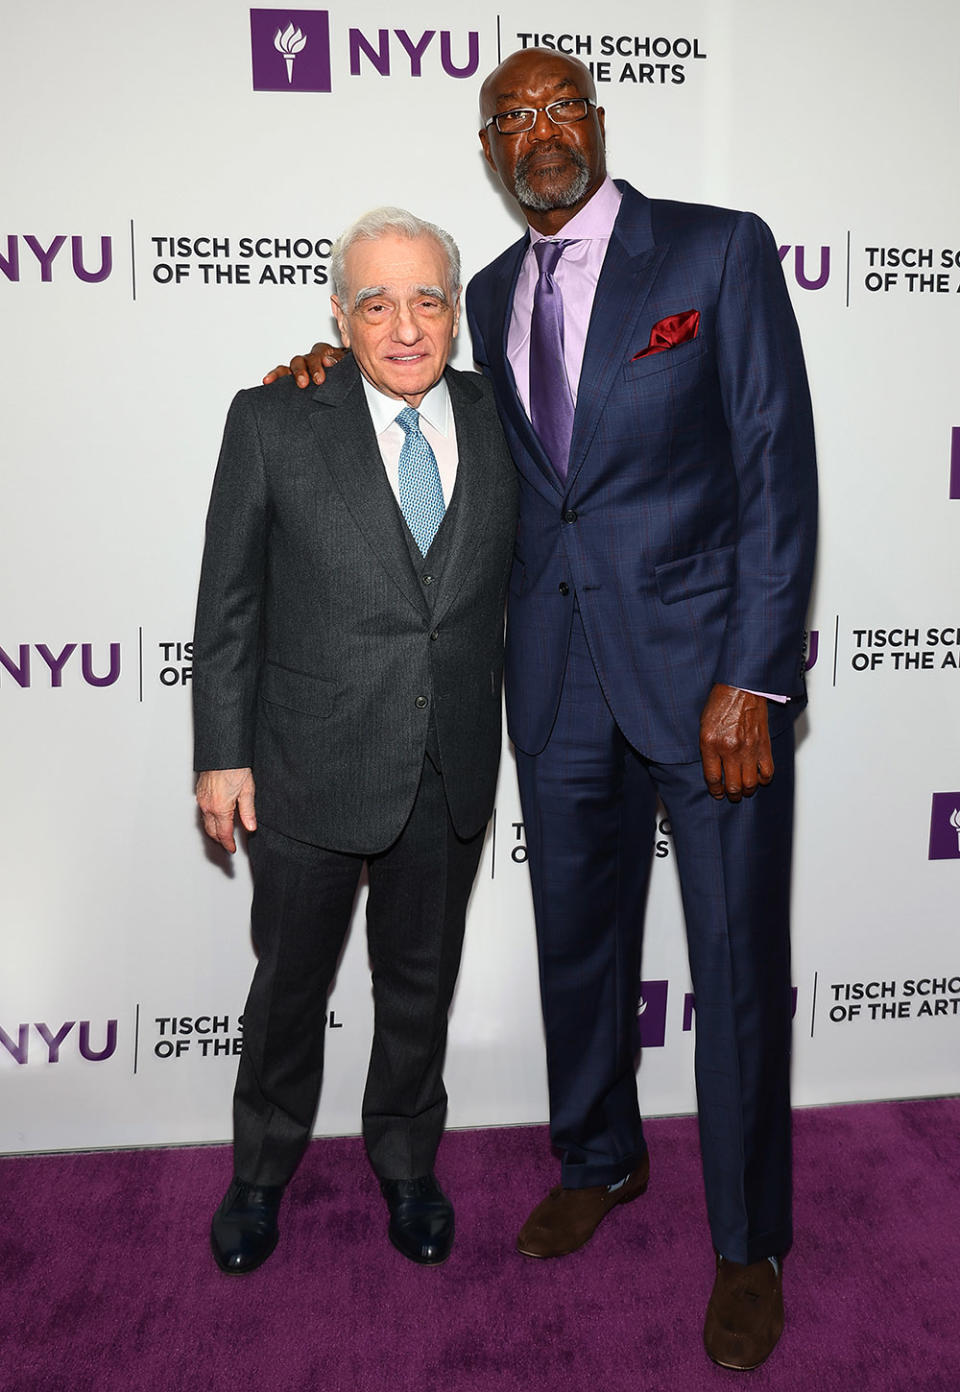 Martian Scorsese and Delroy Lindo attend the 2023 NYU Tisch School Of The Arts Gala at The Ziegfeld Ballroom on April 03, 2023 in New York City.